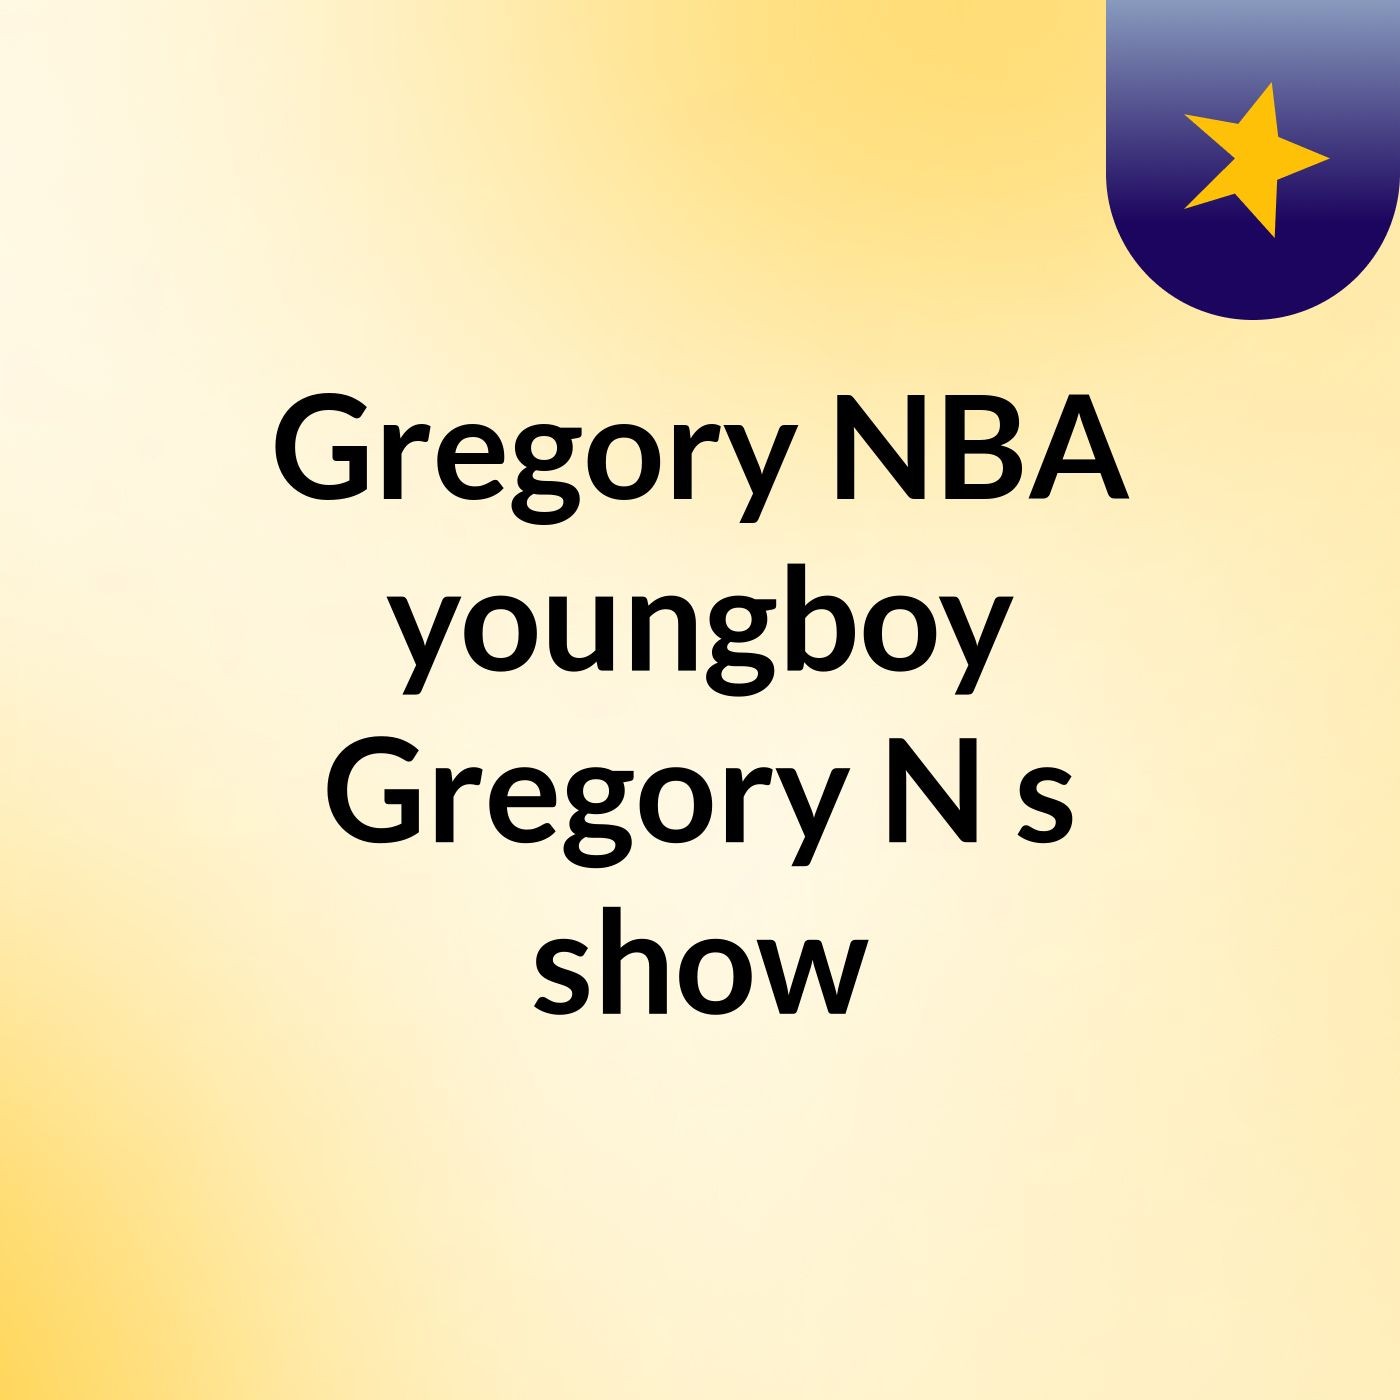 Episode 2 - Gregory NBA youngboy Gregory N's show